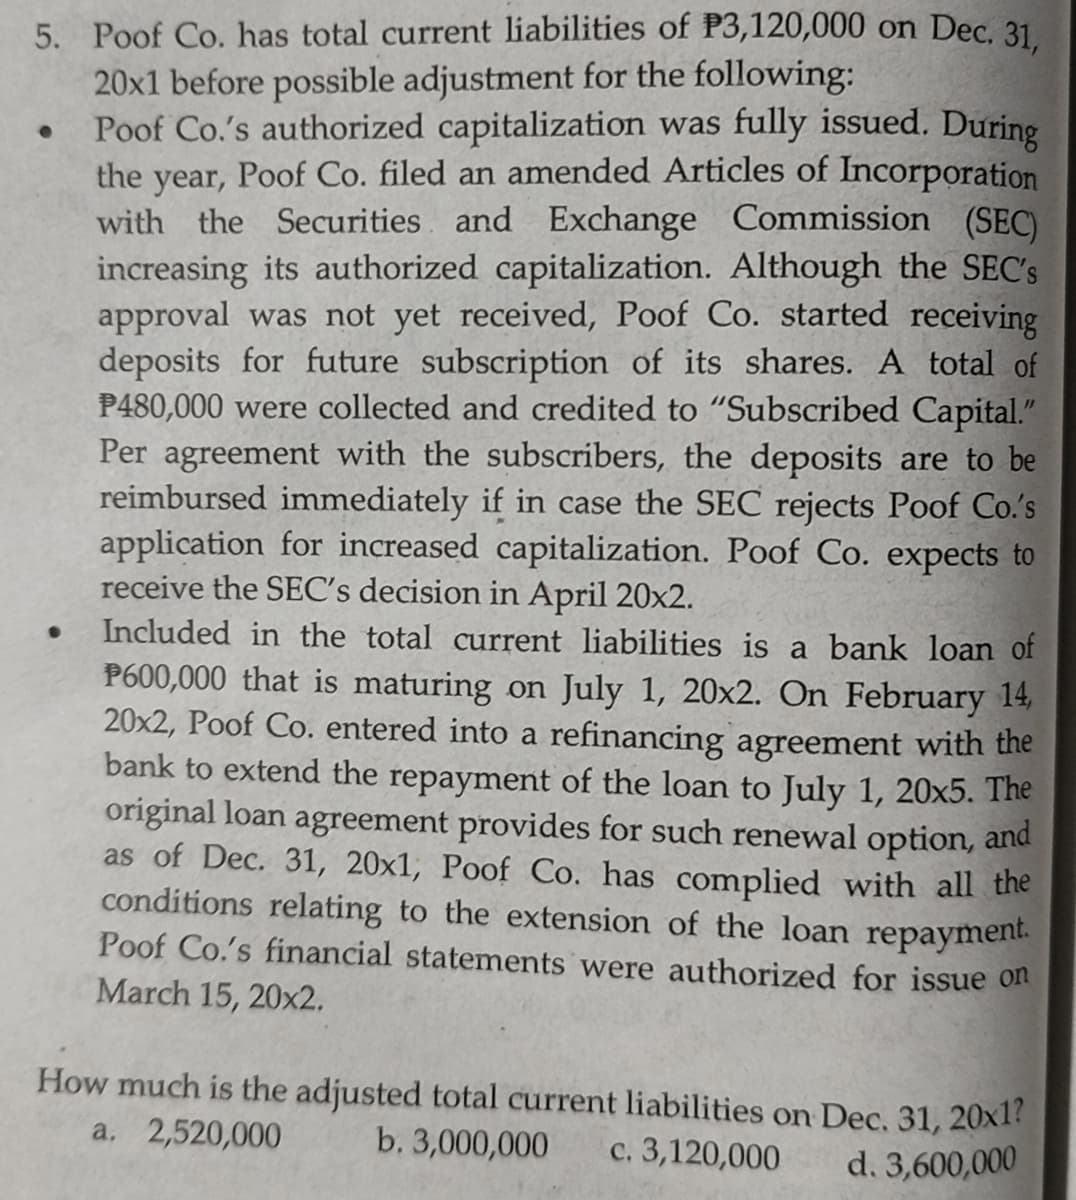 5. Poof Co. has total current liabilities of P3,120,000 on Dec. 31
20x1 before possible adjustment for the following:
Poof Co.'s authorized capitalization was fully issued. During
the year, Poof Co. filed an amended Articles of Incorporation
with the Securities and Exchange Commission (SEC)
increasing its authorized capitalization. Although the SEC's
approval was not yet received, Poof Co. started receiving
deposits for future subscription of its shares. A total of
P480,000 were collected and credited to "Subscribed Capital."
Per agreement with the subscribers, the deposits are to be
reimbursed immediately if in case the SEC rejects Poof Co.'s
application for increased capitalization. Poof Co. expects to
receive the SEC's decision in April 20x2.
Included in the total current liabilities is a bank loan of
P600,000 that is maturing on July 1, 20x2. On February 14,
20x2, Poof Co. entered into a refinancing agreement with the
bank to extend the repayment of the loan to July 1, 20x5. The
original loan agreement provides for such renewal option, and
as of Dec. 31, 20x1, Poof Co. has complied with all the
conditions relating to the extension of the loan repayment.
Poof Co.'s financial statements were authorized for issue on
March 15, 20x2.
How much is the adjusted total current liabilities on Dec, 31, 20x1?
a. 2,520,000
b. 3,000,000
c. 3,120,000
d. 3,600,000
